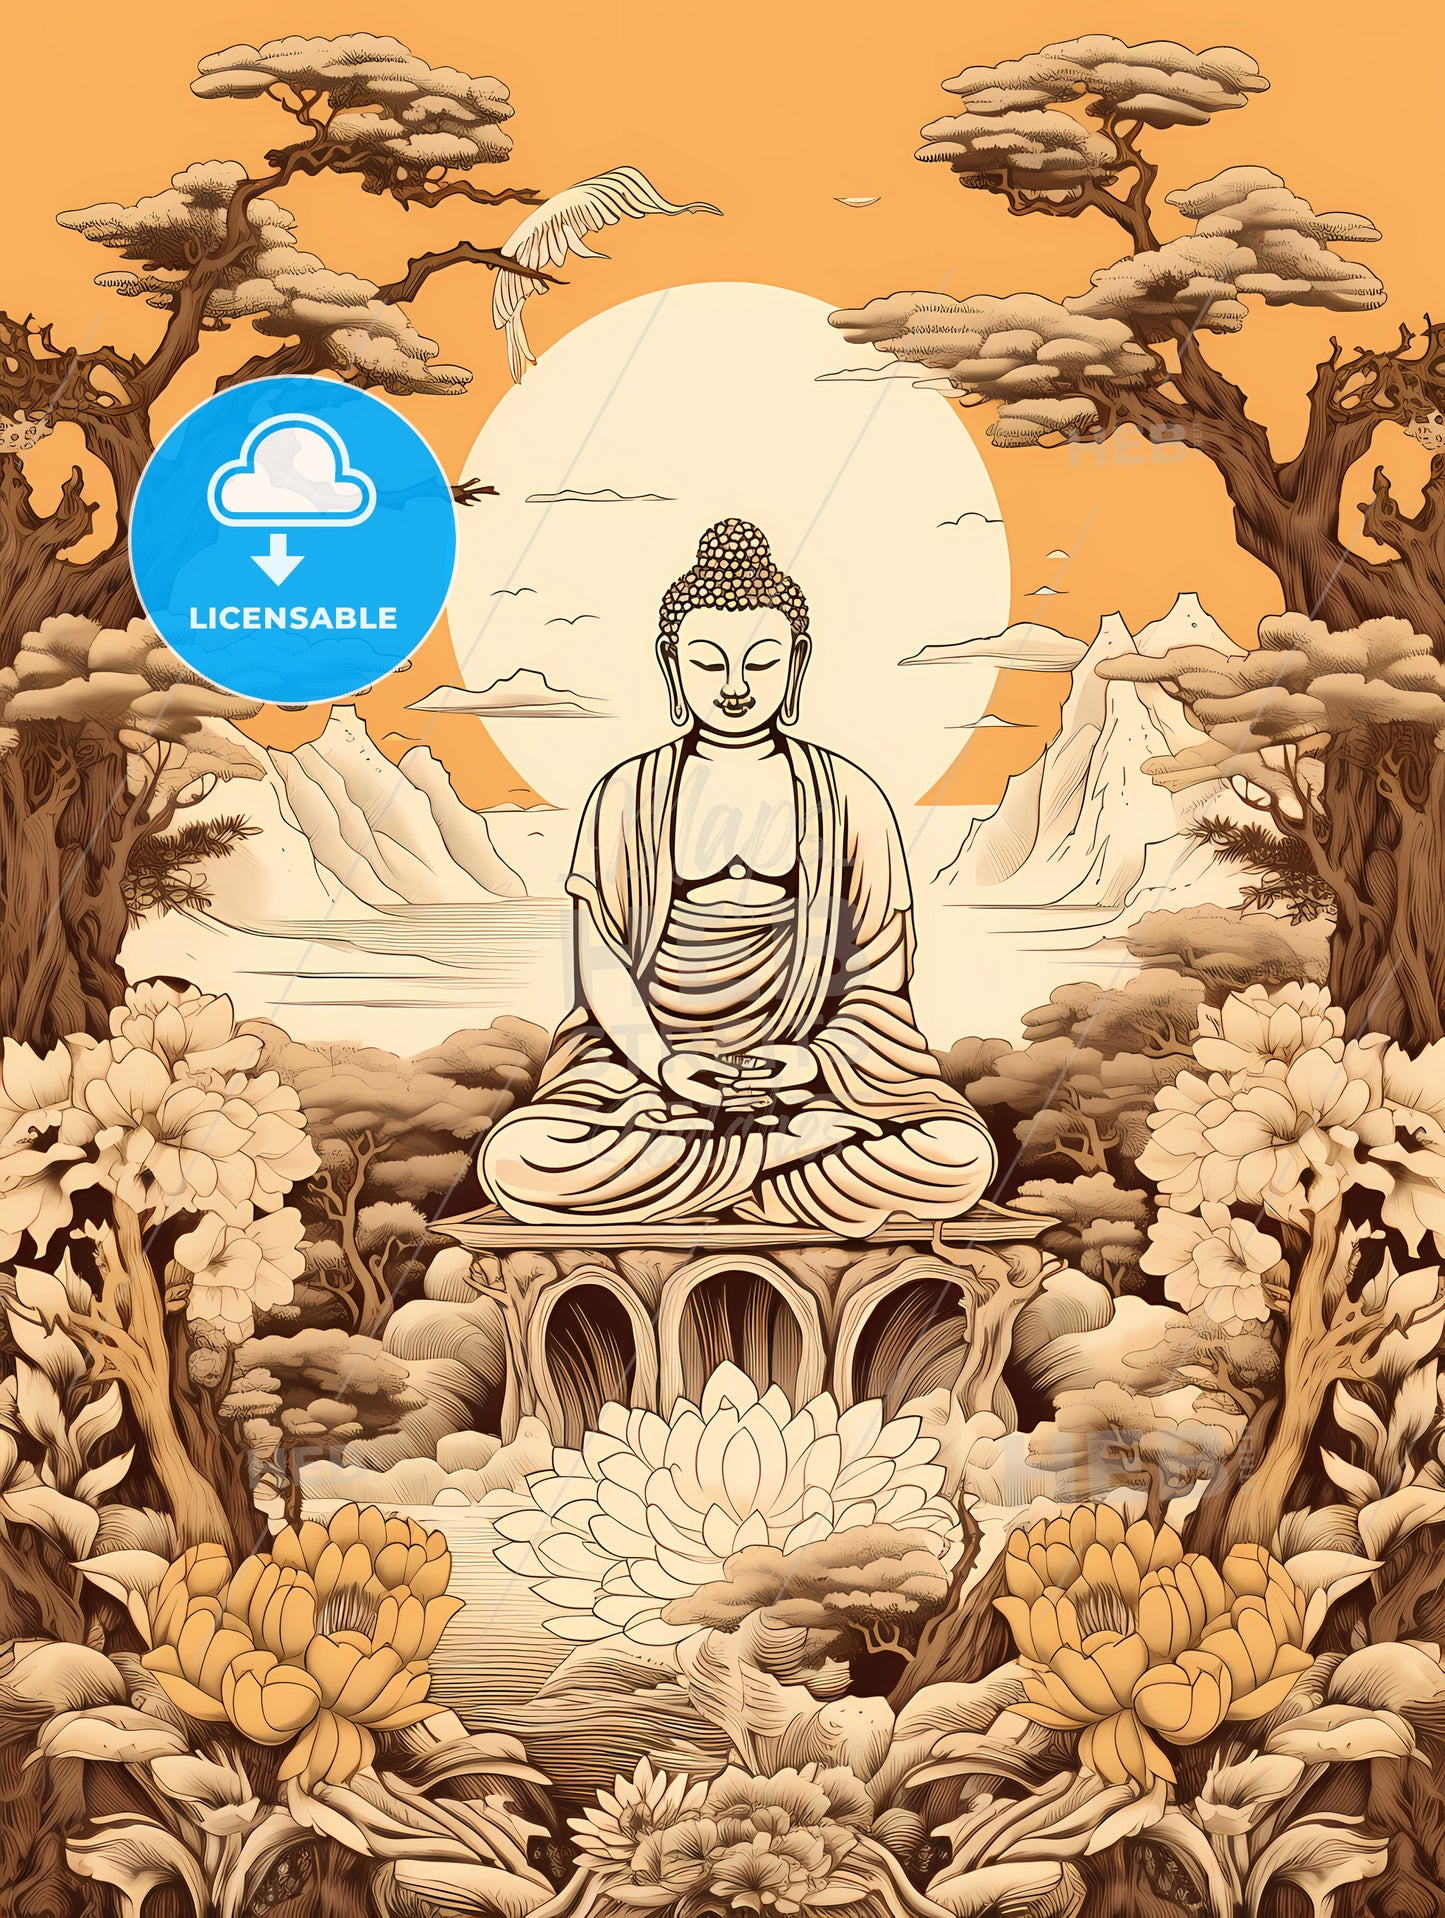 A Painting Of A Buddha Sitting In A Lotus Position Surrounded By Trees And Mountains